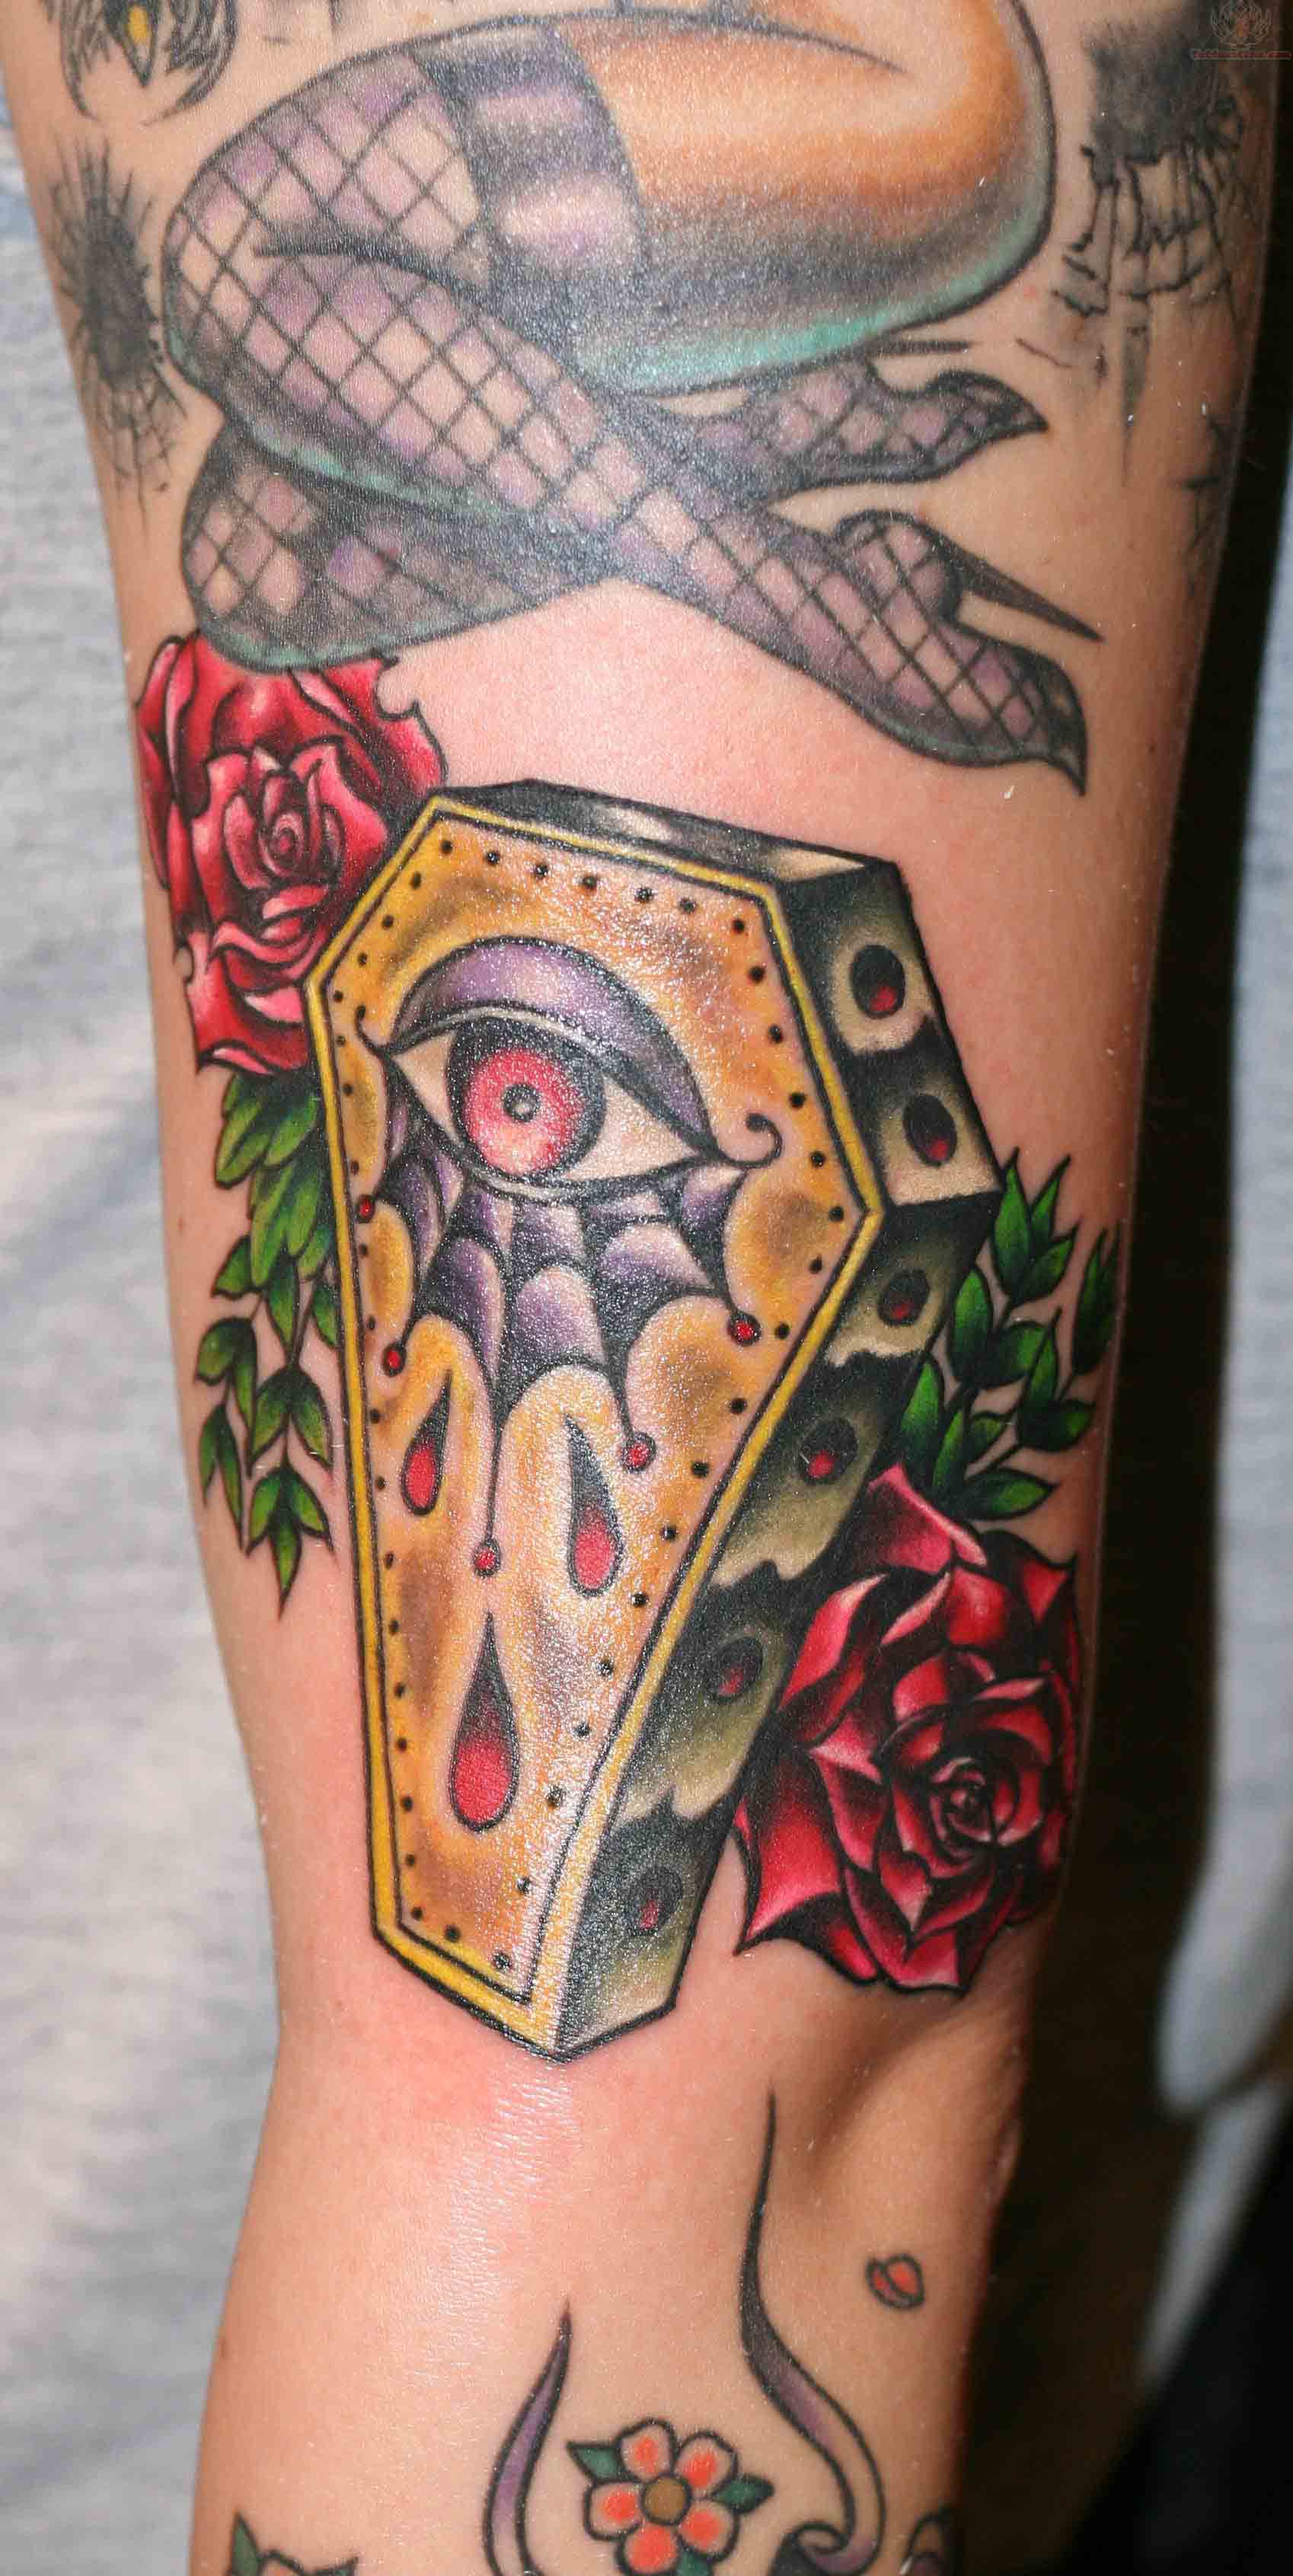 Red Roses And One Eyed Coffin Tattoo